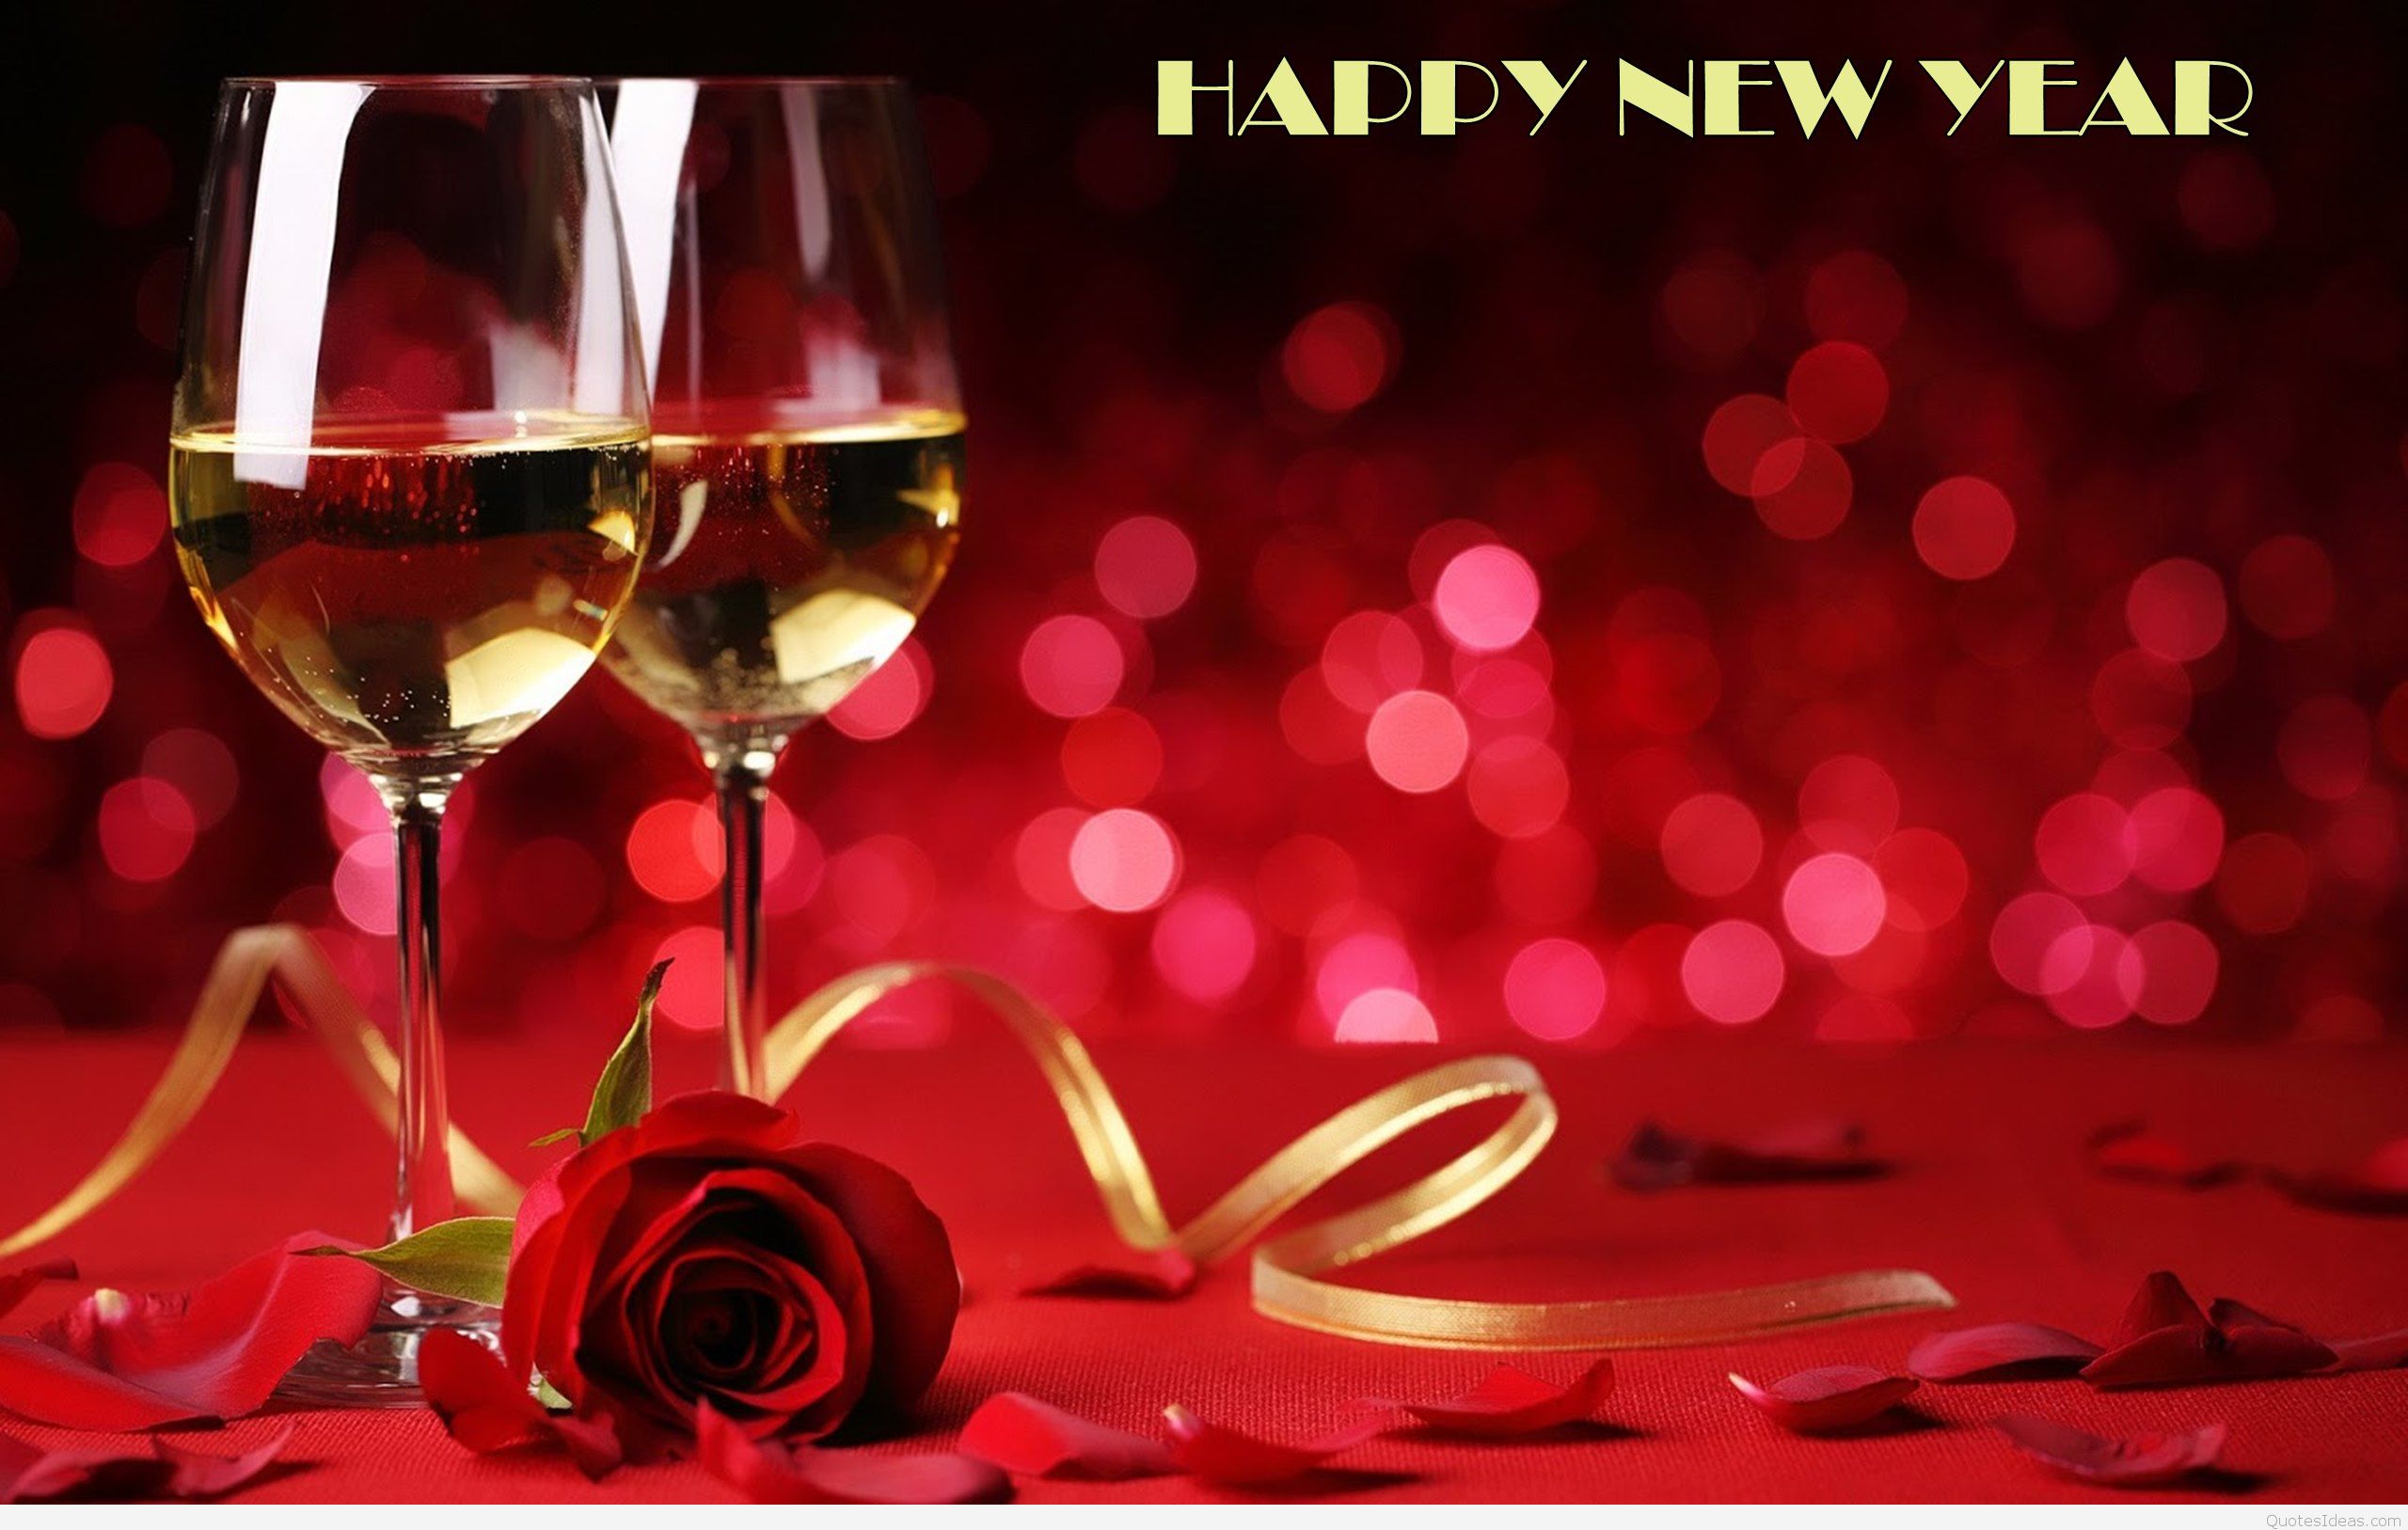 Happy new year eve party hd wallpaper 2016